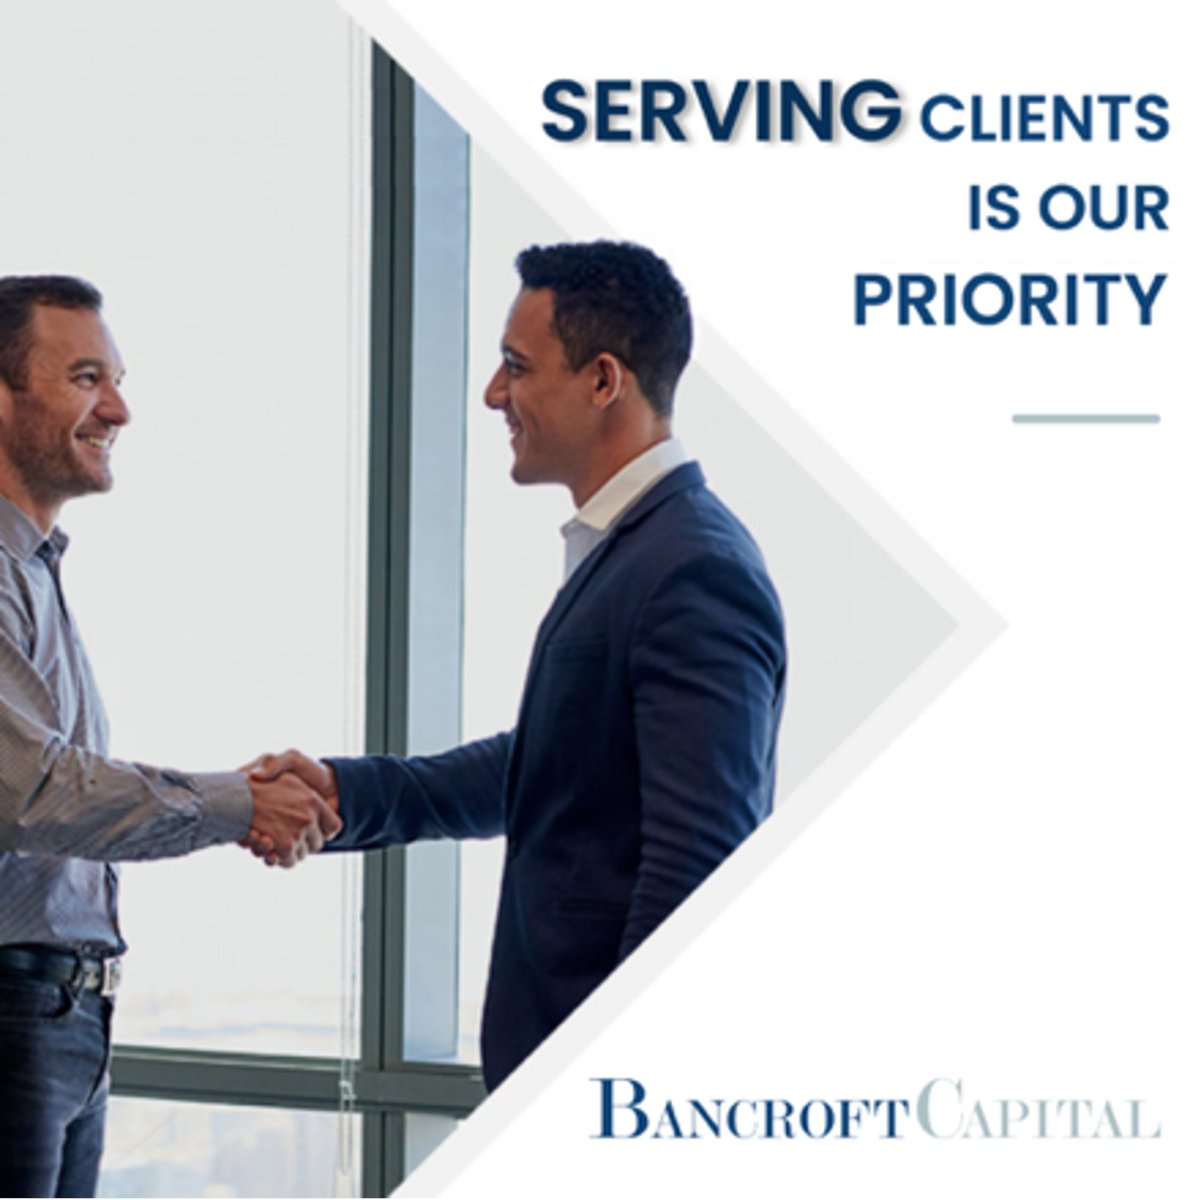 Our team of industry veterans manages five core business units – fixed income sales & trading, equity trading, cash management, capital markets and public finance. Learn more about our services: bancroft4vets.com/services/. #BancroftCapital #ServiceToClients #CashManagement